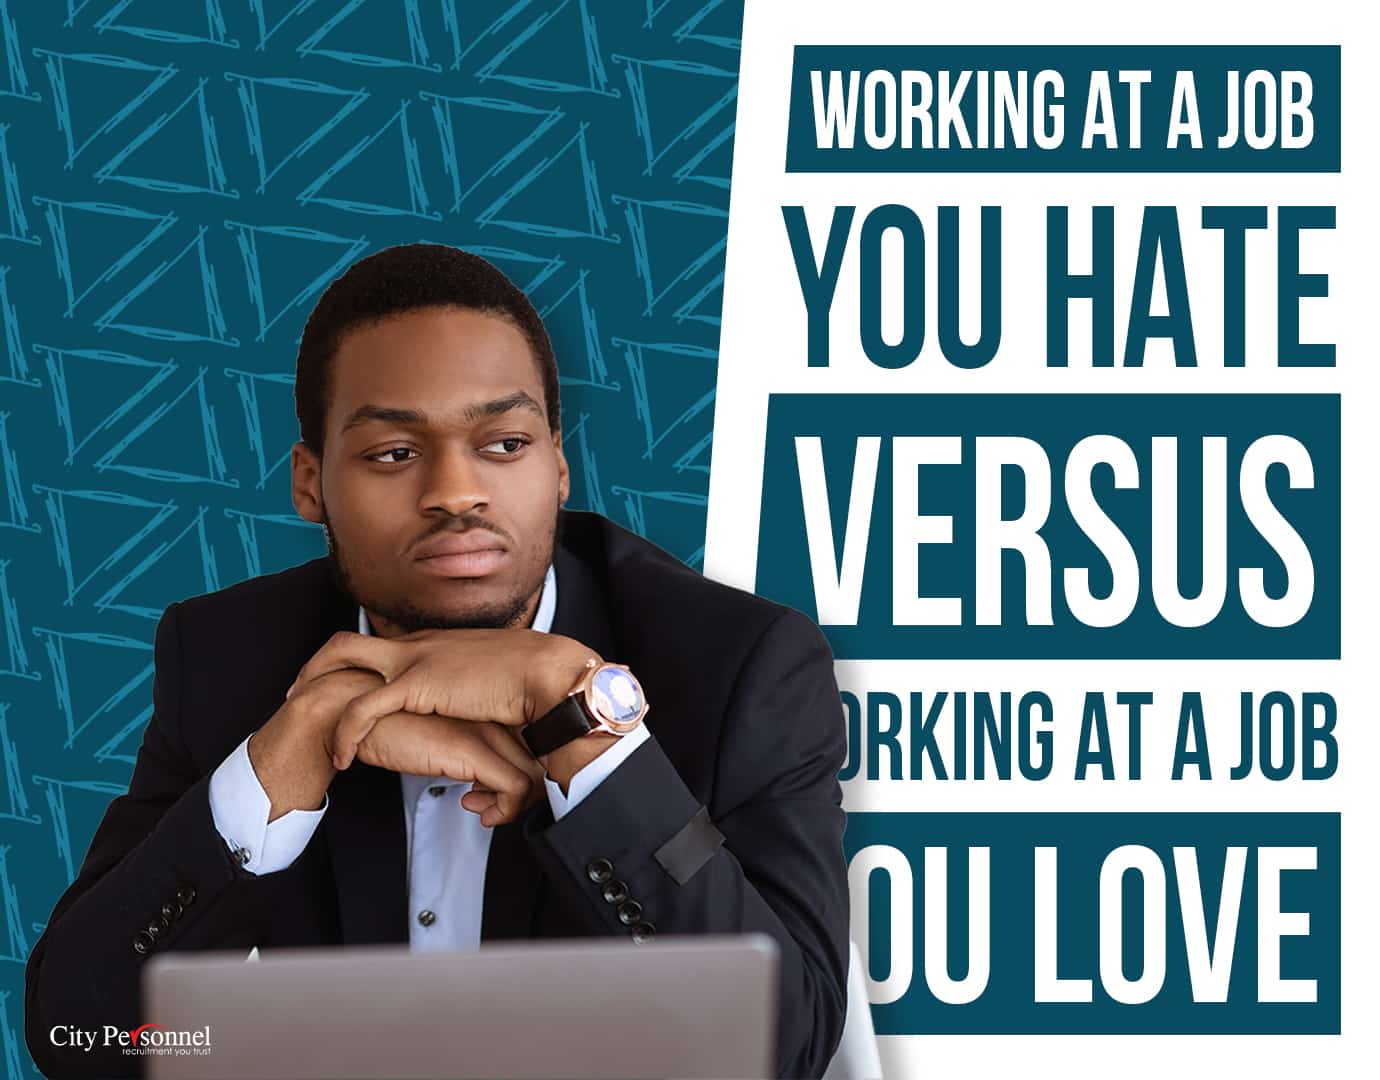 Working at a job you hate versus working at a job you love